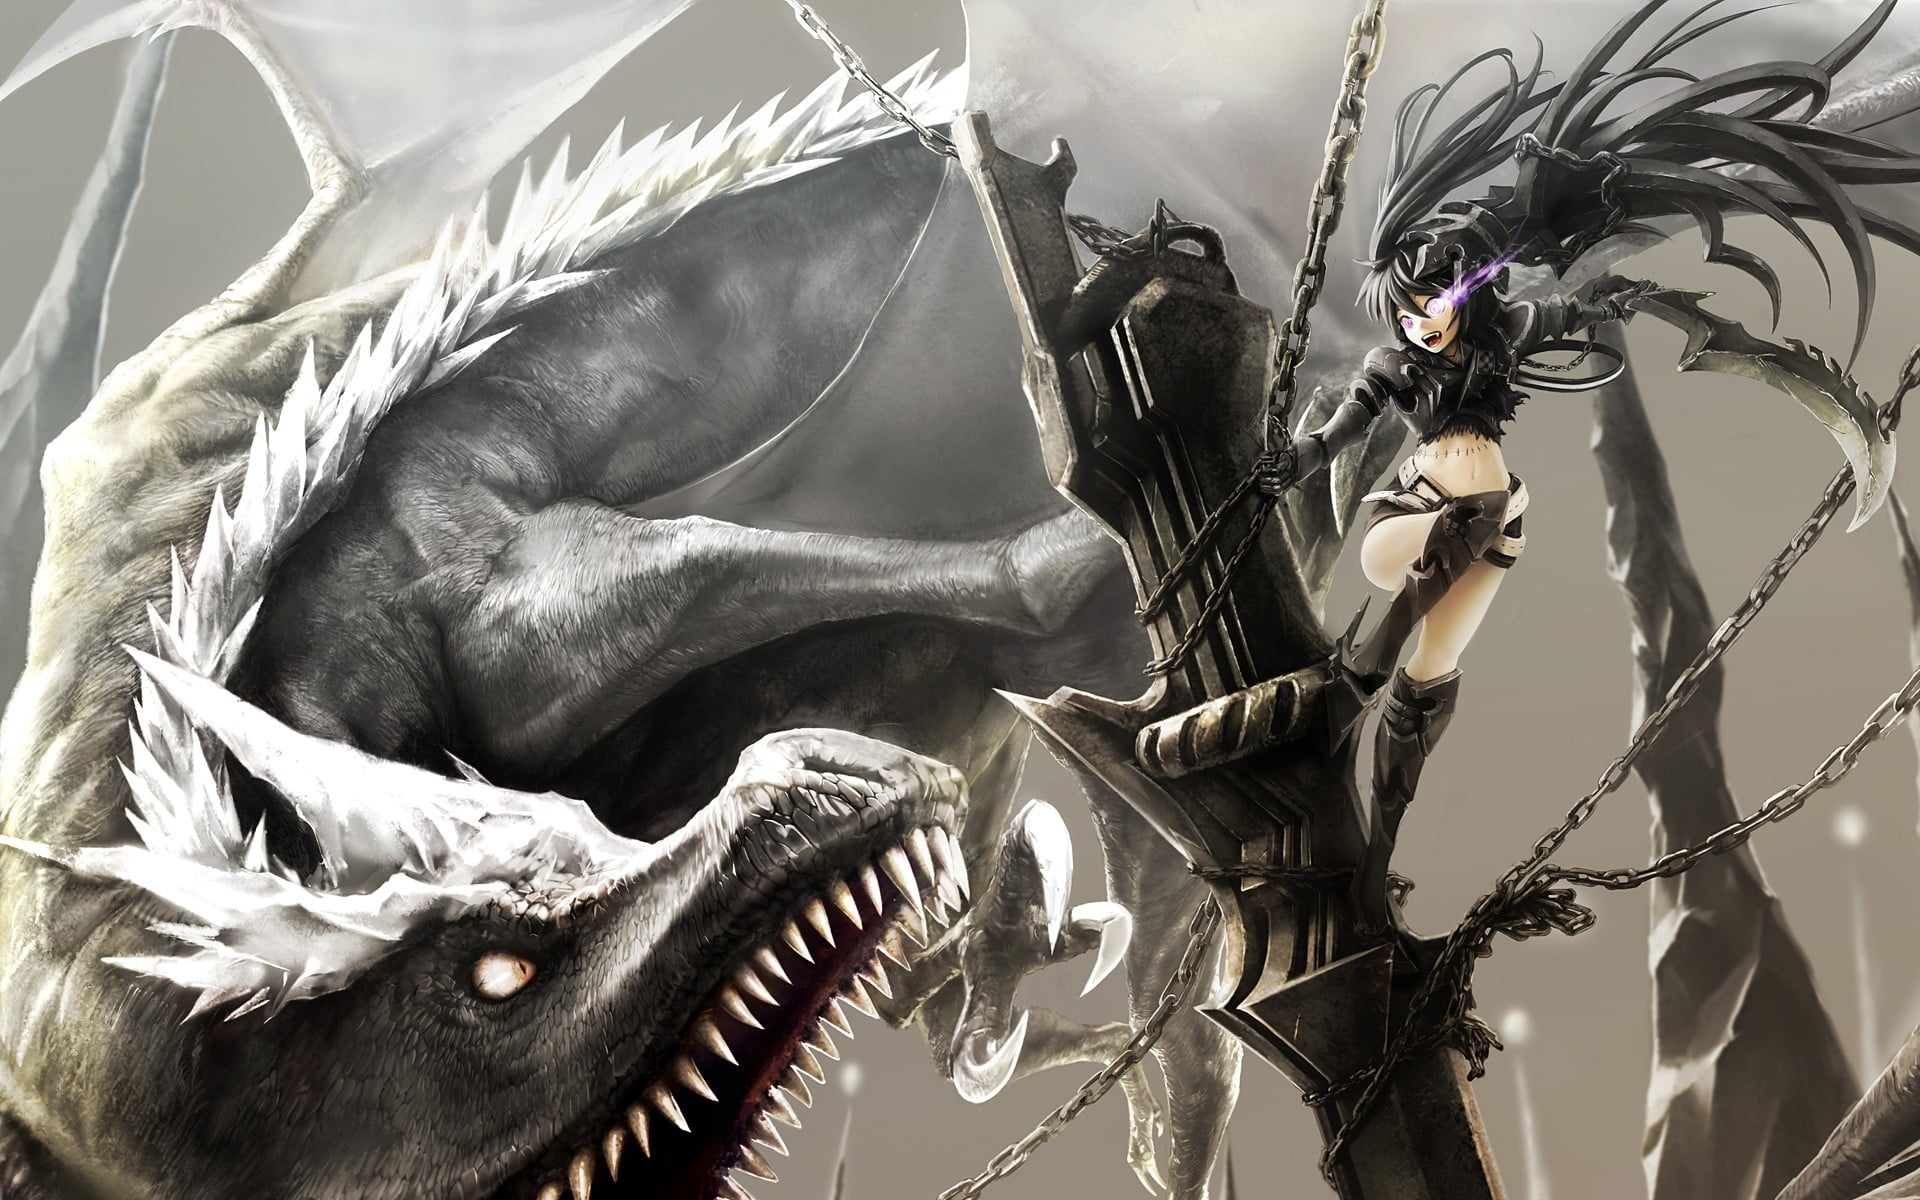 female anime character and gray dragon wallpaper, Black Rock Shooter